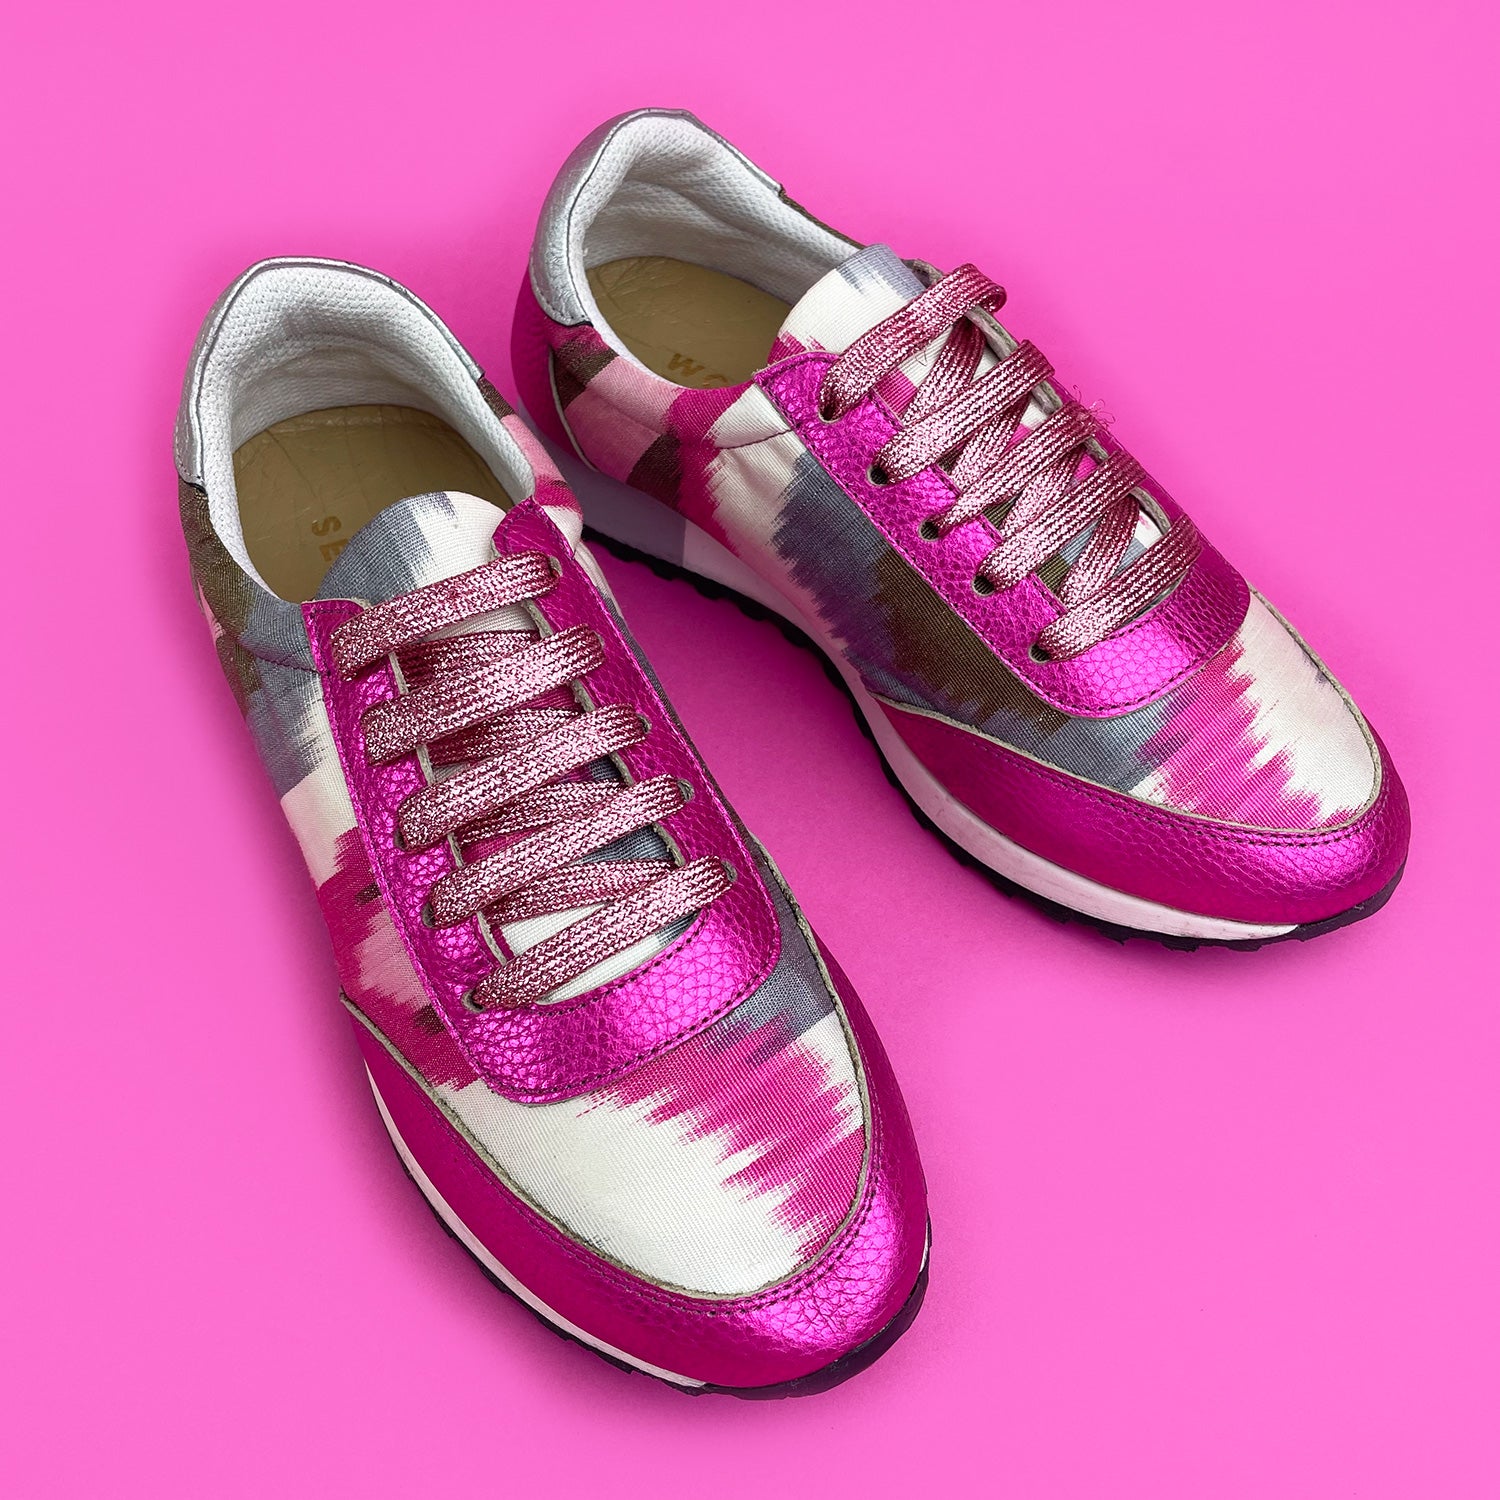 Pink, white, grey and green Ikat Silk trainers with pink metallic leather and pink glitter shoelaces